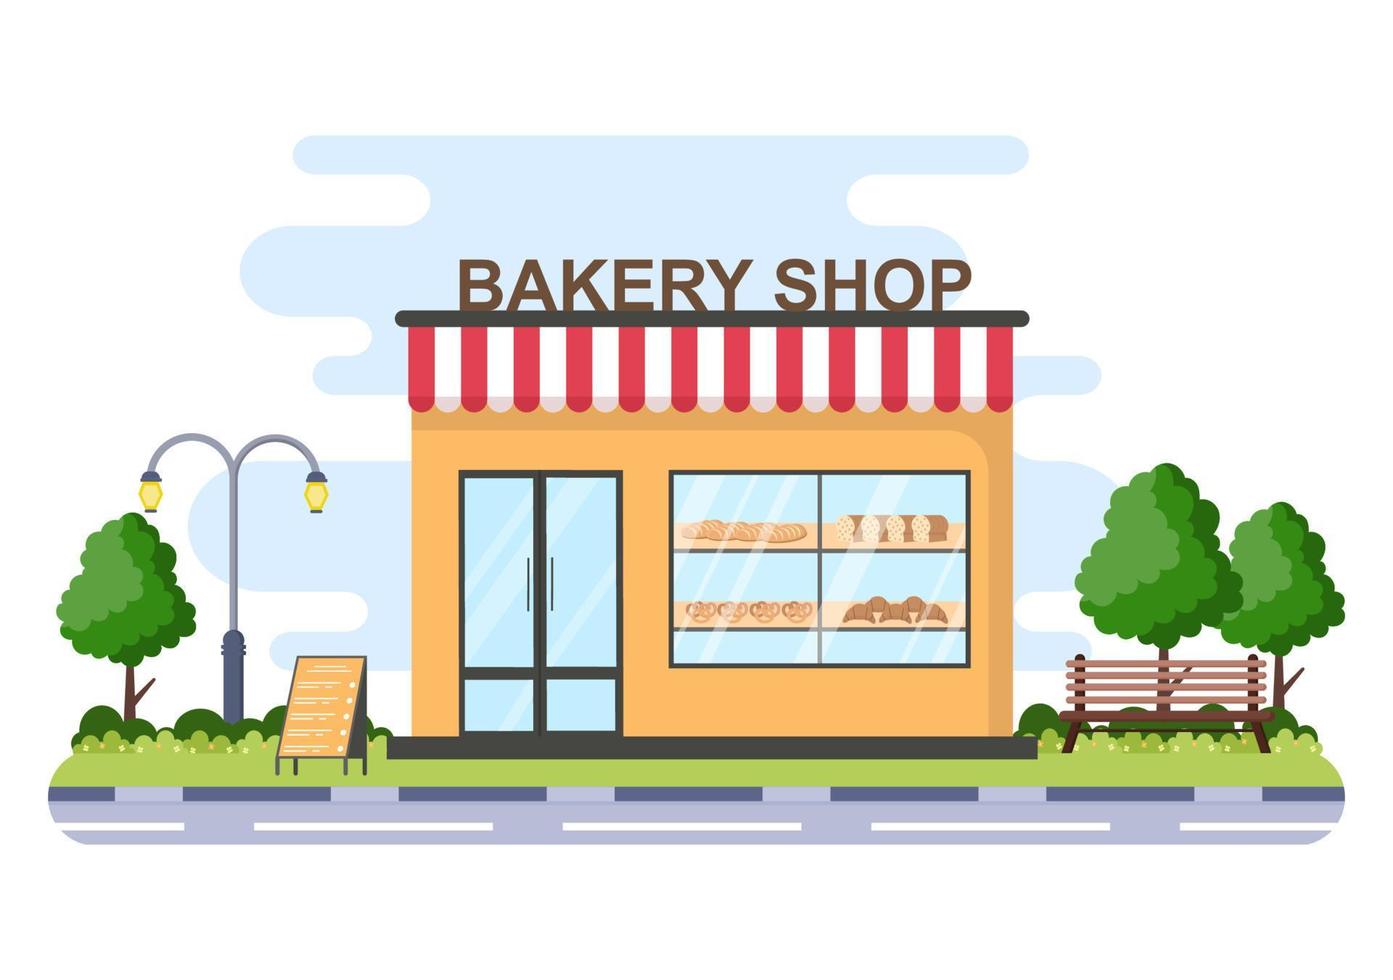 Bakery Shop Building That Sells Various Types of Bread such as White Bread, Pastry and Others All Baked in Flat Background for Poster Illustration vector